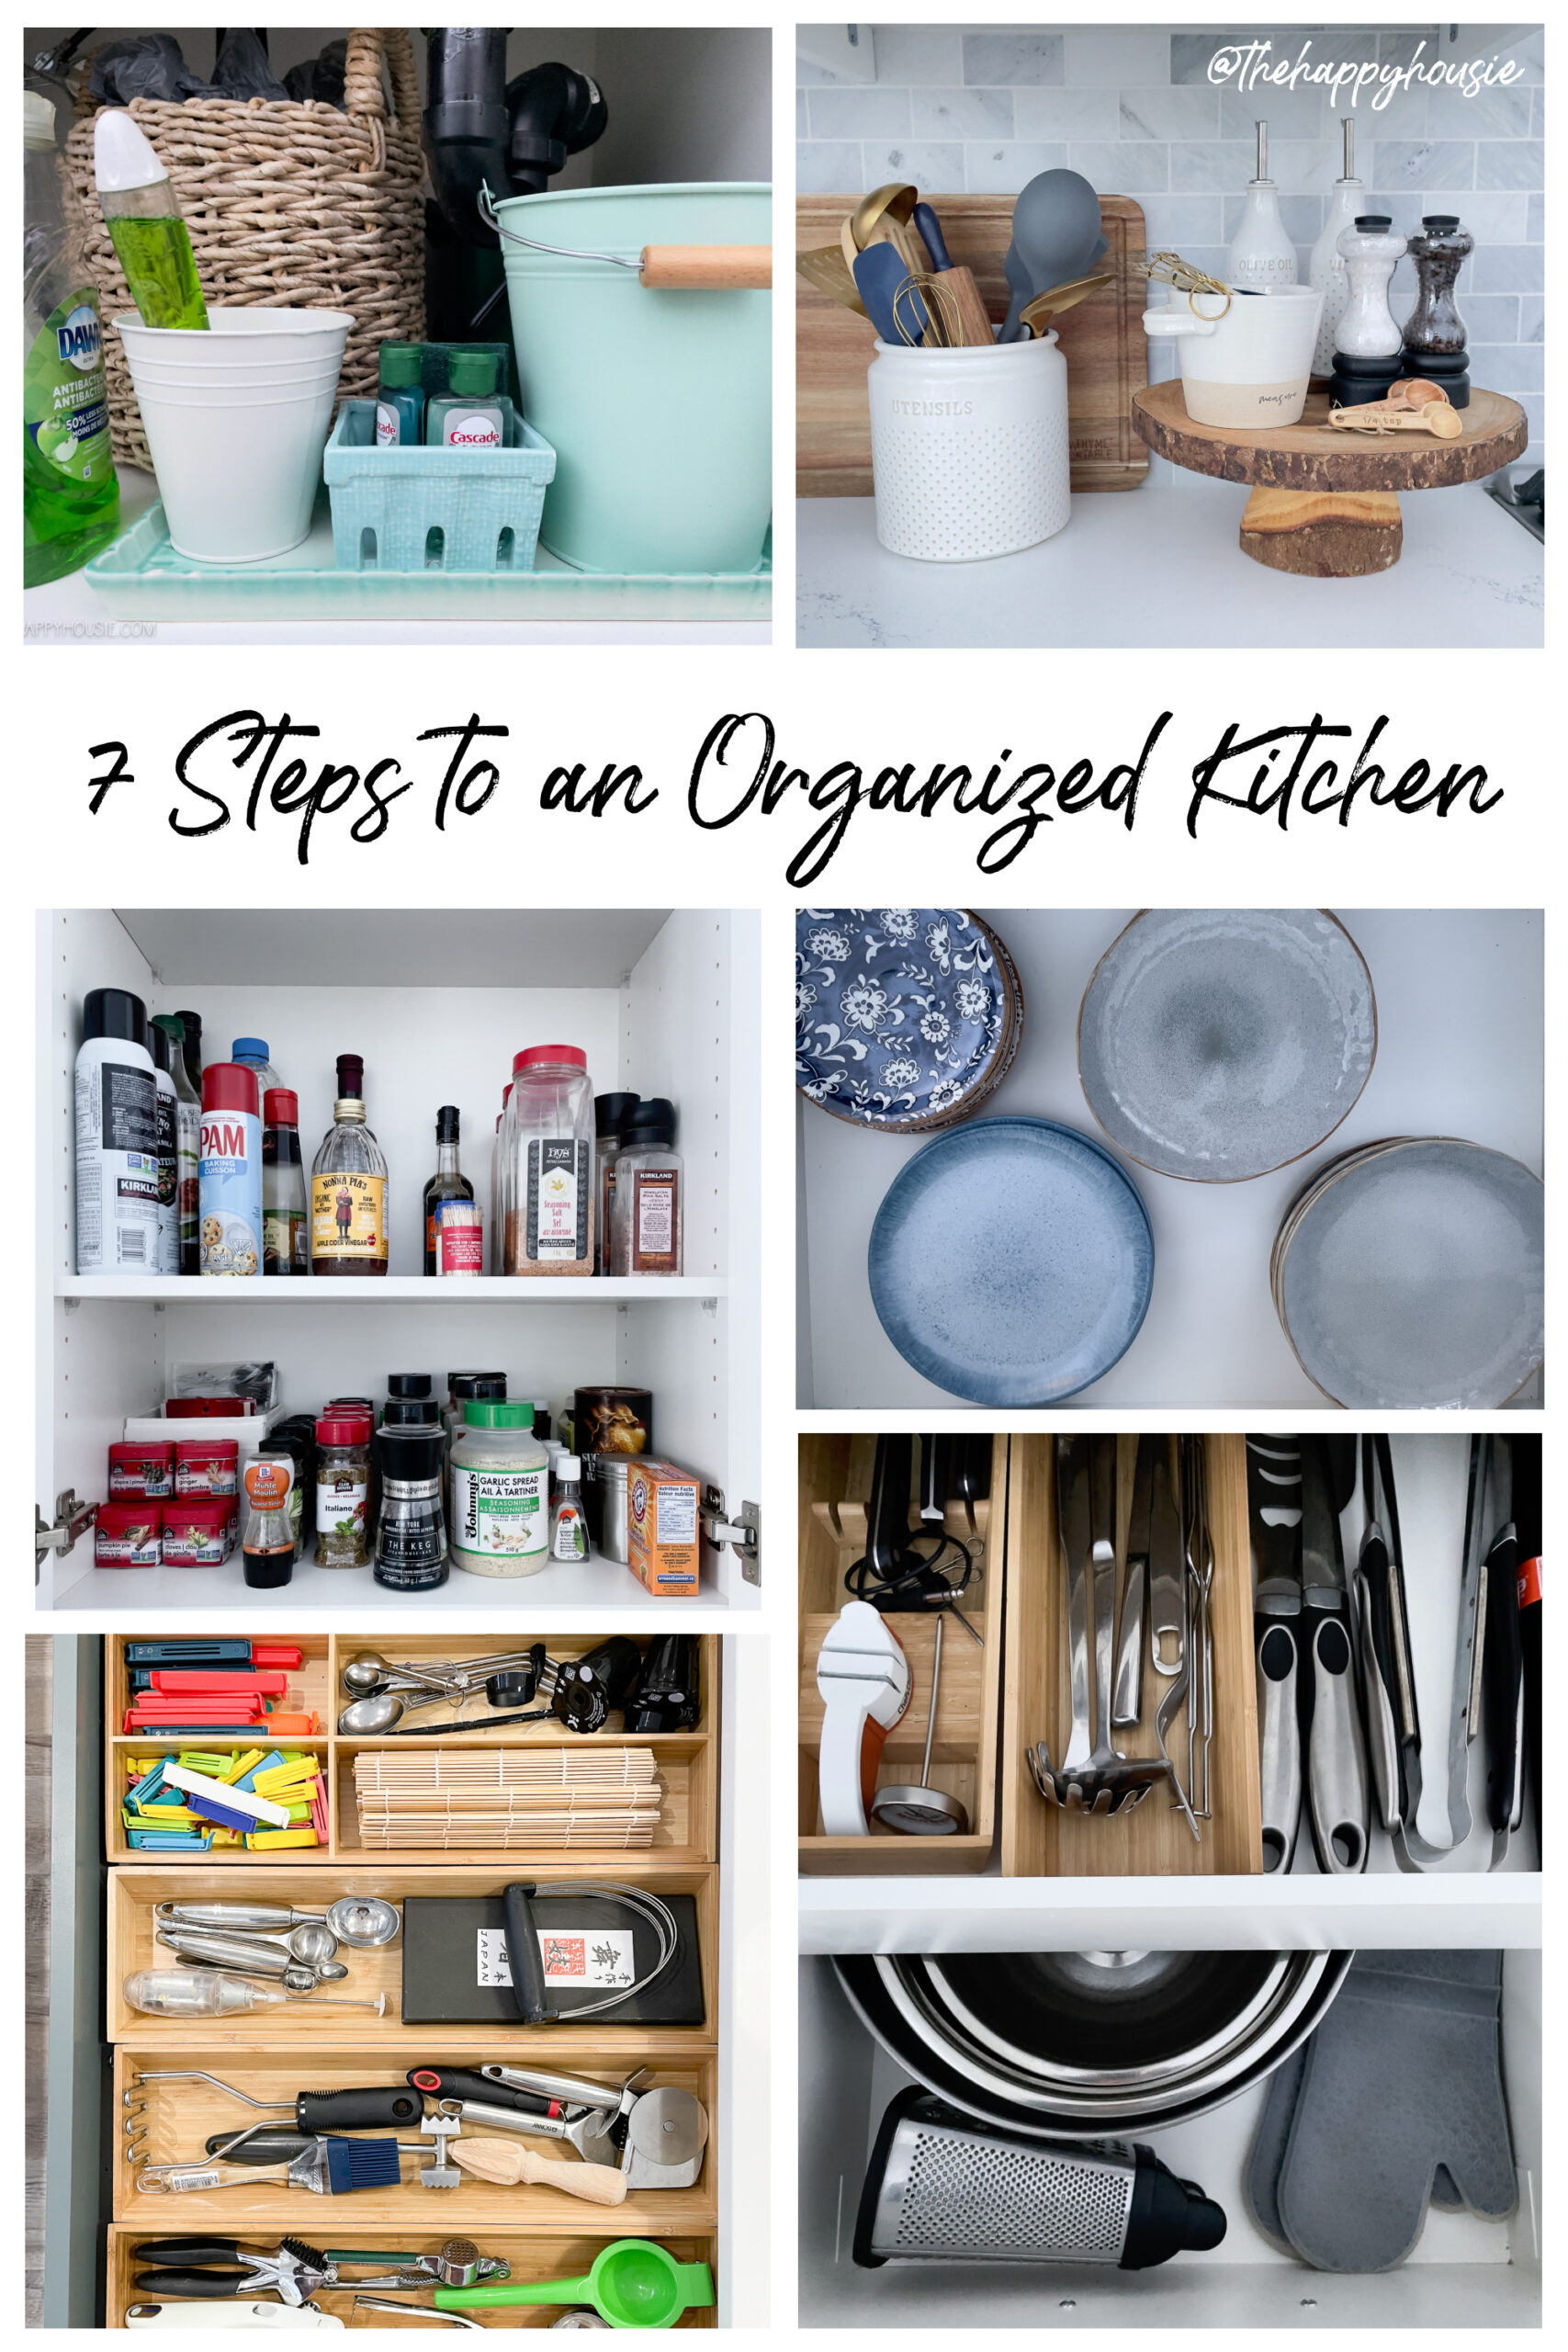 Best Way To Organize Kitchen Cabinets - Step-By-Step Project